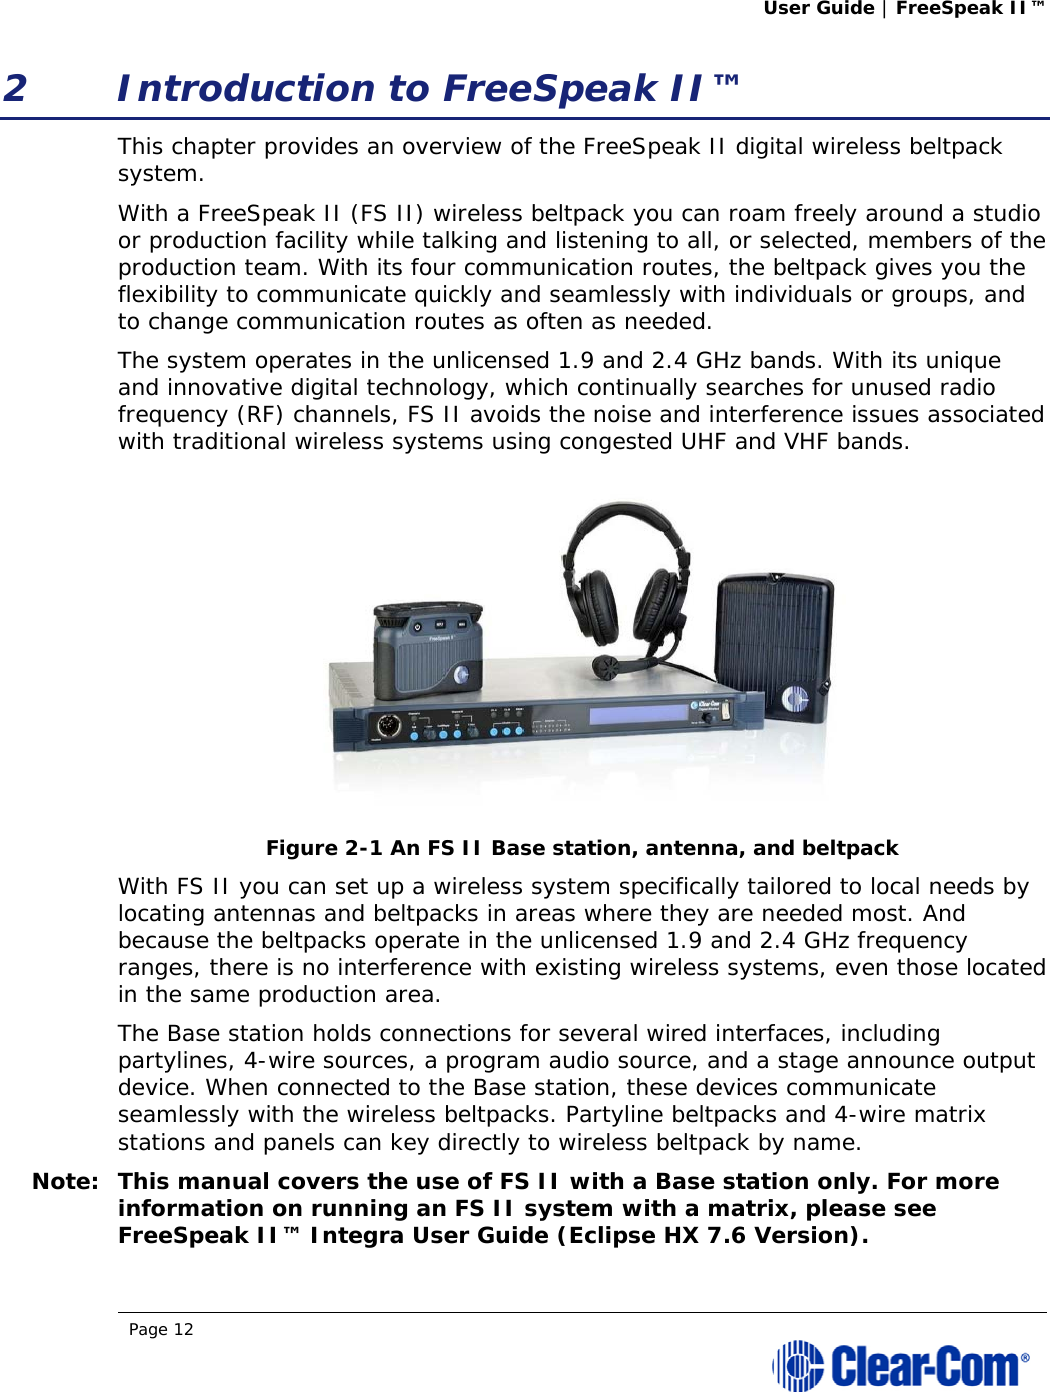 User Guide | FreeSpeak II™  Page 12  2 Introduction to FreeSpeak II™ This chapter provides an overview of the FreeSpeak II digital wireless beltpack system.  With a FreeSpeak II (FS II) wireless beltpack you can roam freely around a studio or production facility while talking and listening to all, or selected, members of the production team. With its four communication routes, the beltpack gives you the flexibility to communicate quickly and seamlessly with individuals or groups, and to change communication routes as often as needed. The system operates in the unlicensed 1.9 and 2.4 GHz bands. With its unique and innovative digital technology, which continually searches for unused radio frequency (RF) channels, FS II avoids the noise and interference issues associated with traditional wireless systems using congested UHF and VHF bands.  Figure 2-1 An FS II Base station, antenna, and beltpack With FS II you can set up a wireless system specifically tailored to local needs by locating antennas and beltpacks in areas where they are needed most. And because the beltpacks operate in the unlicensed 1.9 and 2.4 GHz frequency ranges, there is no interference with existing wireless systems, even those located in the same production area.  The Base station holds connections for several wired interfaces, including partylines, 4-wire sources, a program audio source, and a stage announce output device. When connected to the Base station, these devices communicate seamlessly with the wireless beltpacks. Partyline beltpacks and 4-wire matrix stations and panels can key directly to wireless beltpack by name.  Note: This manual covers the use of FS II with a Base station only. For more information on running an FS II system with a matrix, please see FreeSpeak II™ Integra User Guide (Eclipse HX 7.6 Version). 